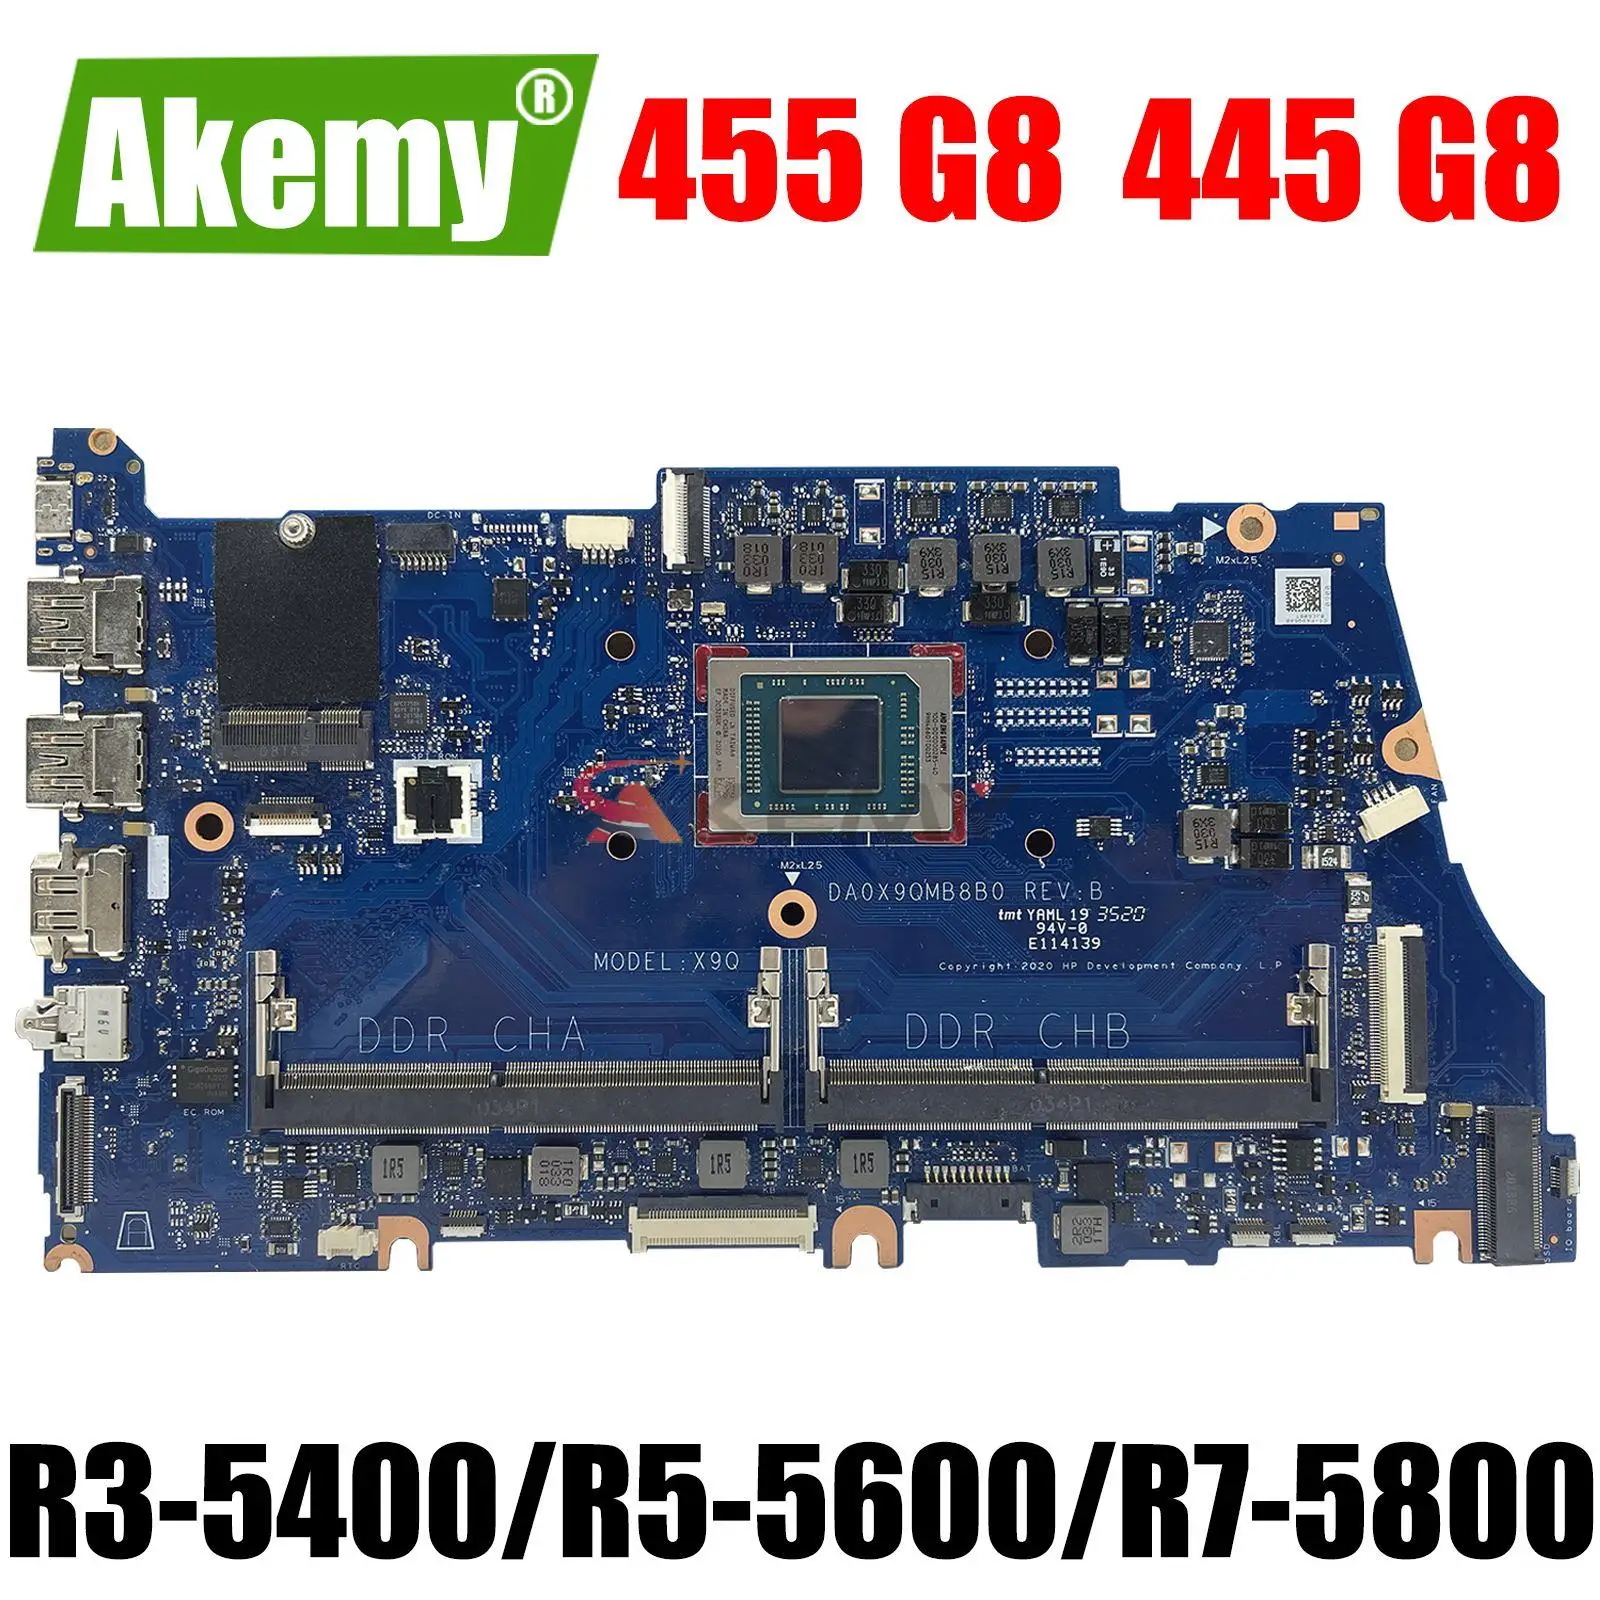 

X9Q DA0X9QMB8D0 Motherboard with R3 R5 R7 AMD CPU DDR4 For HP Probook 455 G8 445 G8 Laptop Motherboard Mainboard